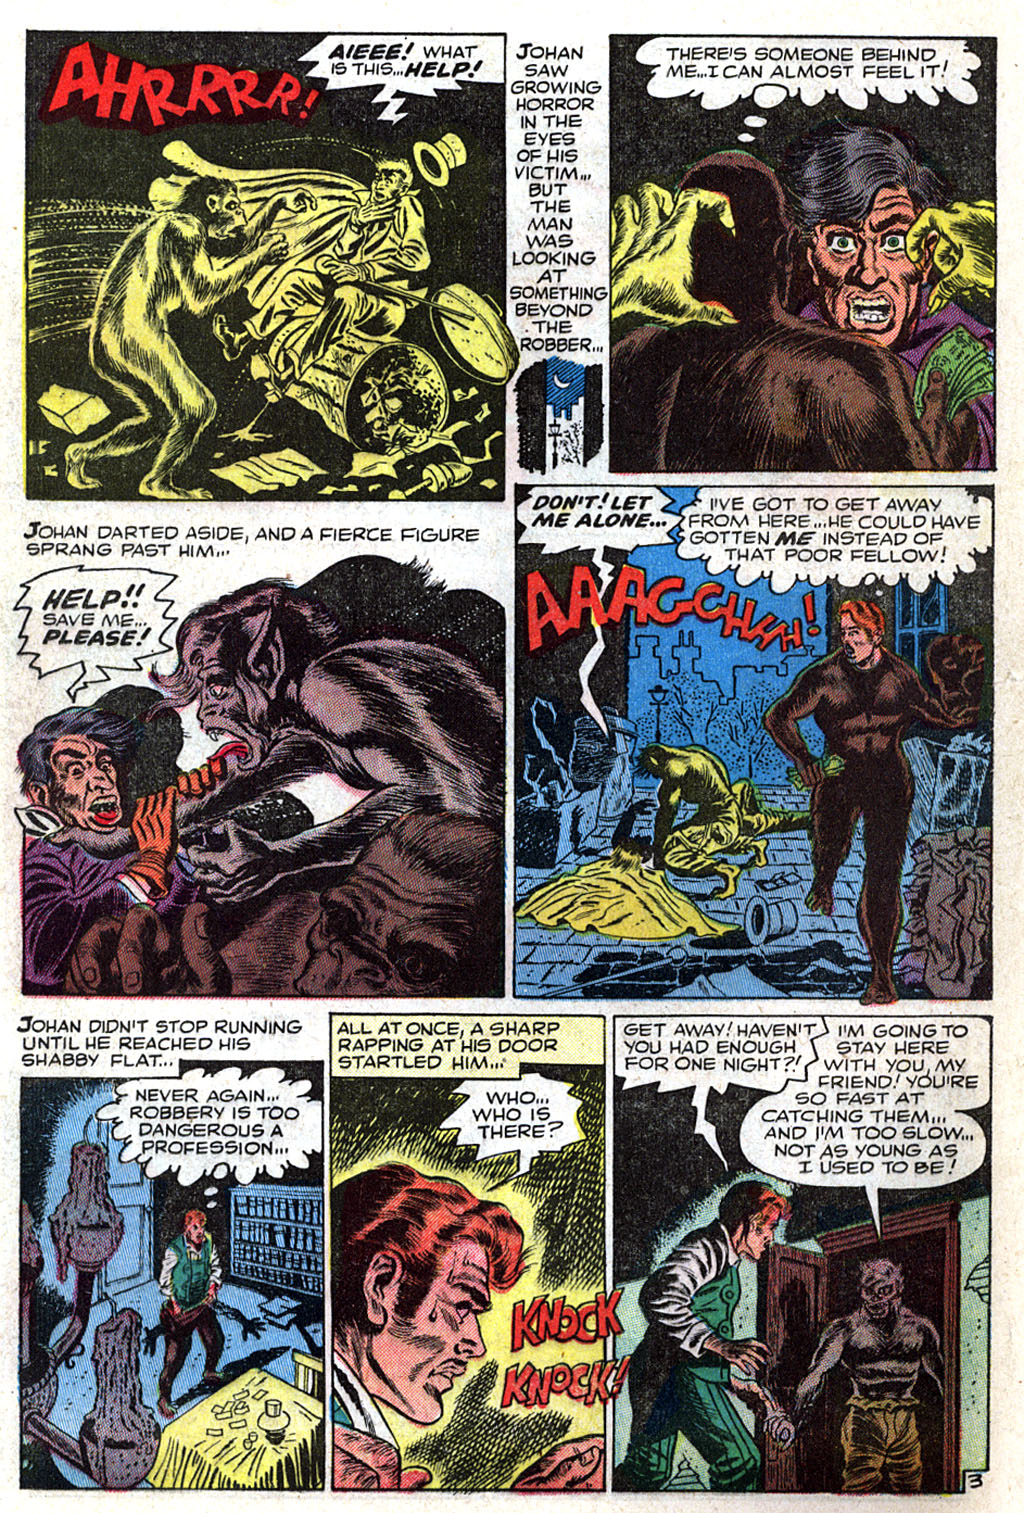 Marvel Tales (1949) 116 Page 10